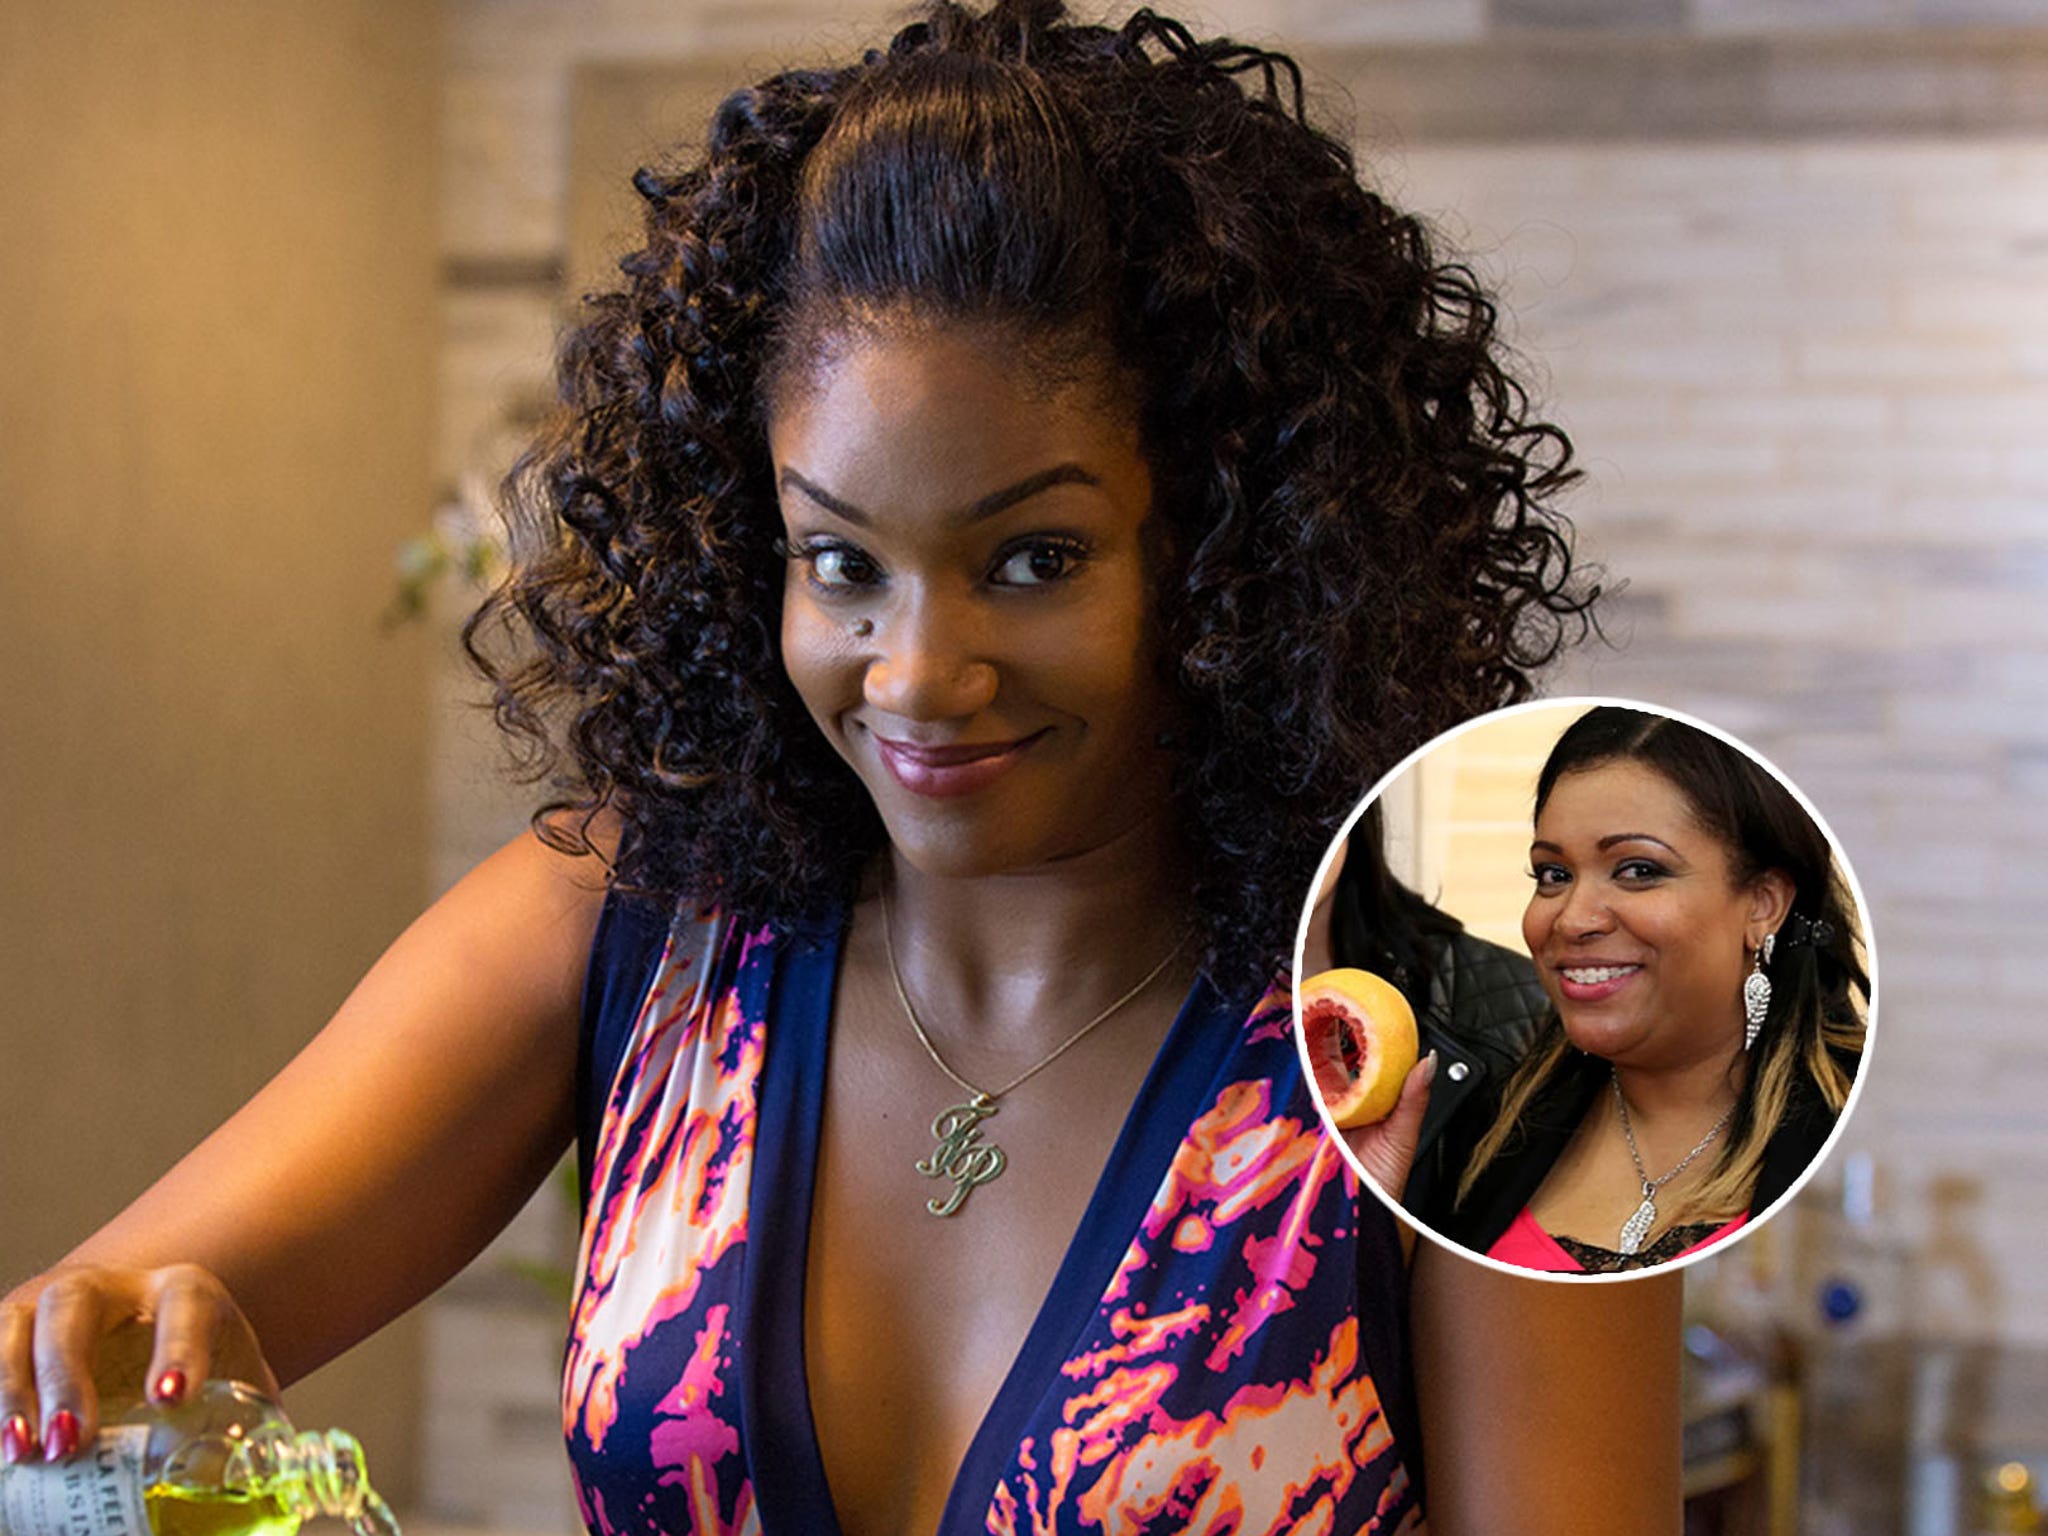 Grapefruit Technique in Girls Trip Is Real and Viral Sexpert Auntie Angel Thinks They Nailed It (Exclusive Interview)